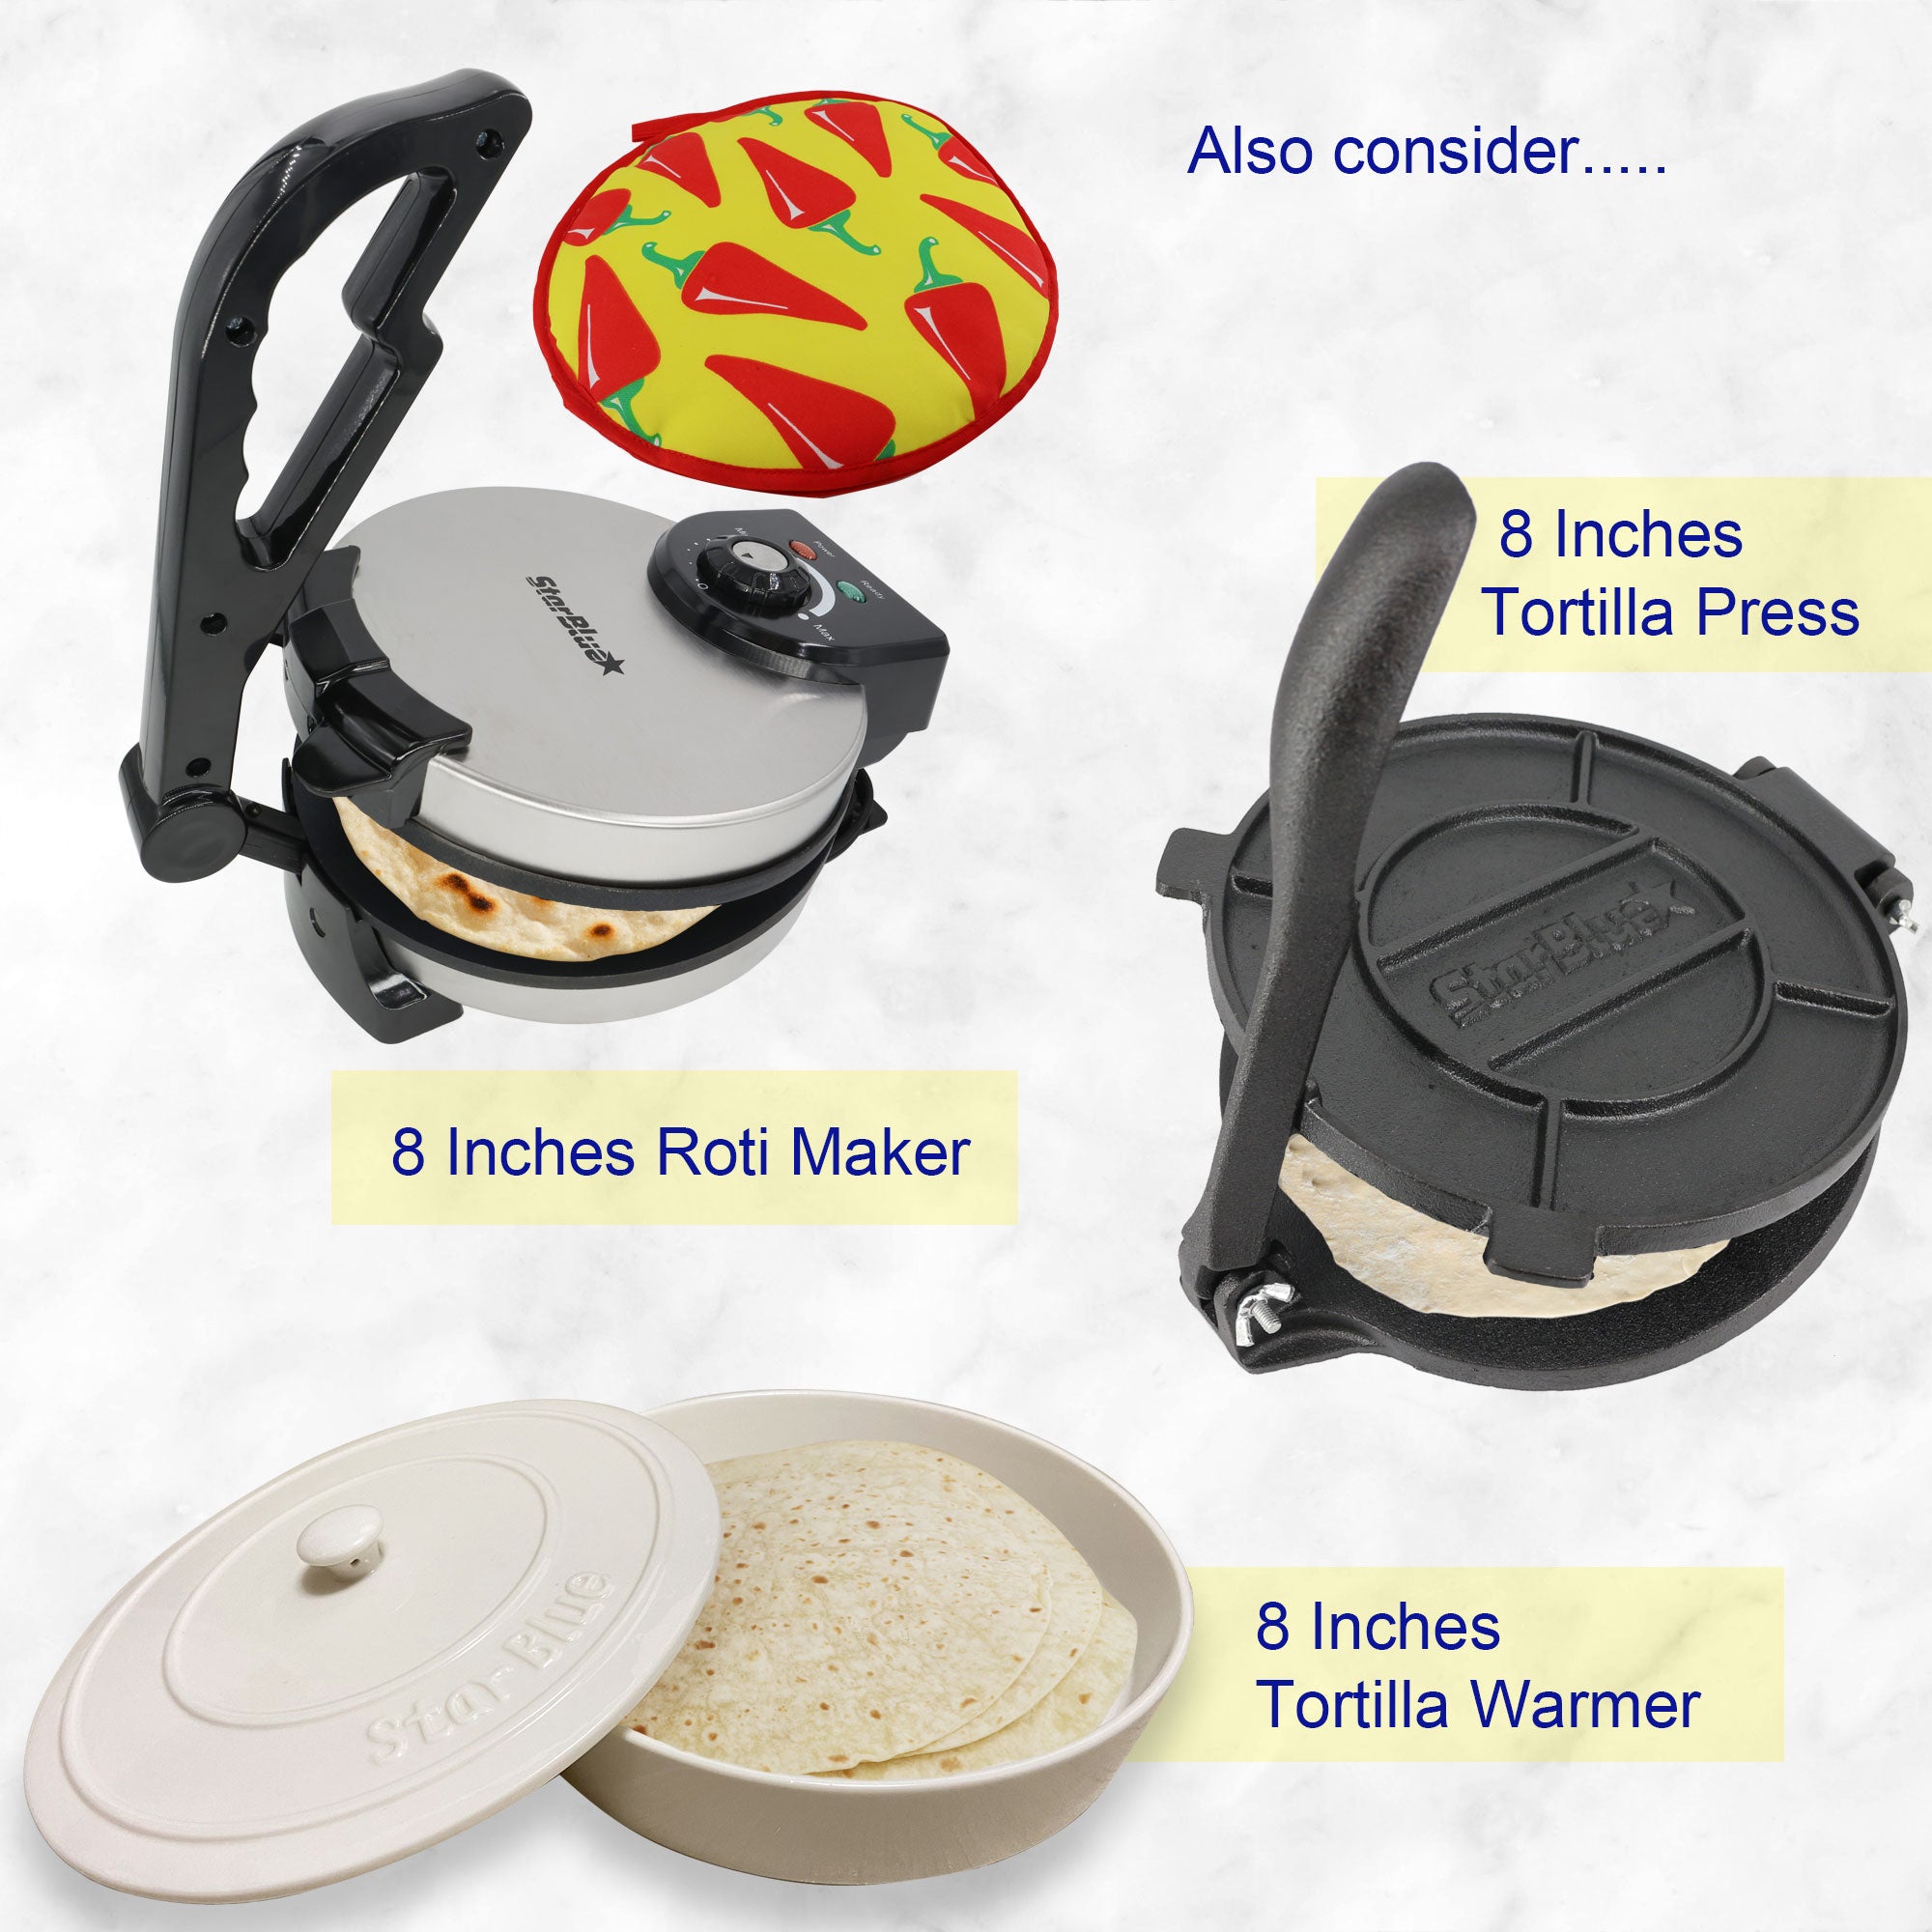 10 Inch Cast Iron Tortilla Press and 10 Inches Ceramic Tortilla Warmer by  StarBlue with FREE Recipes ebook